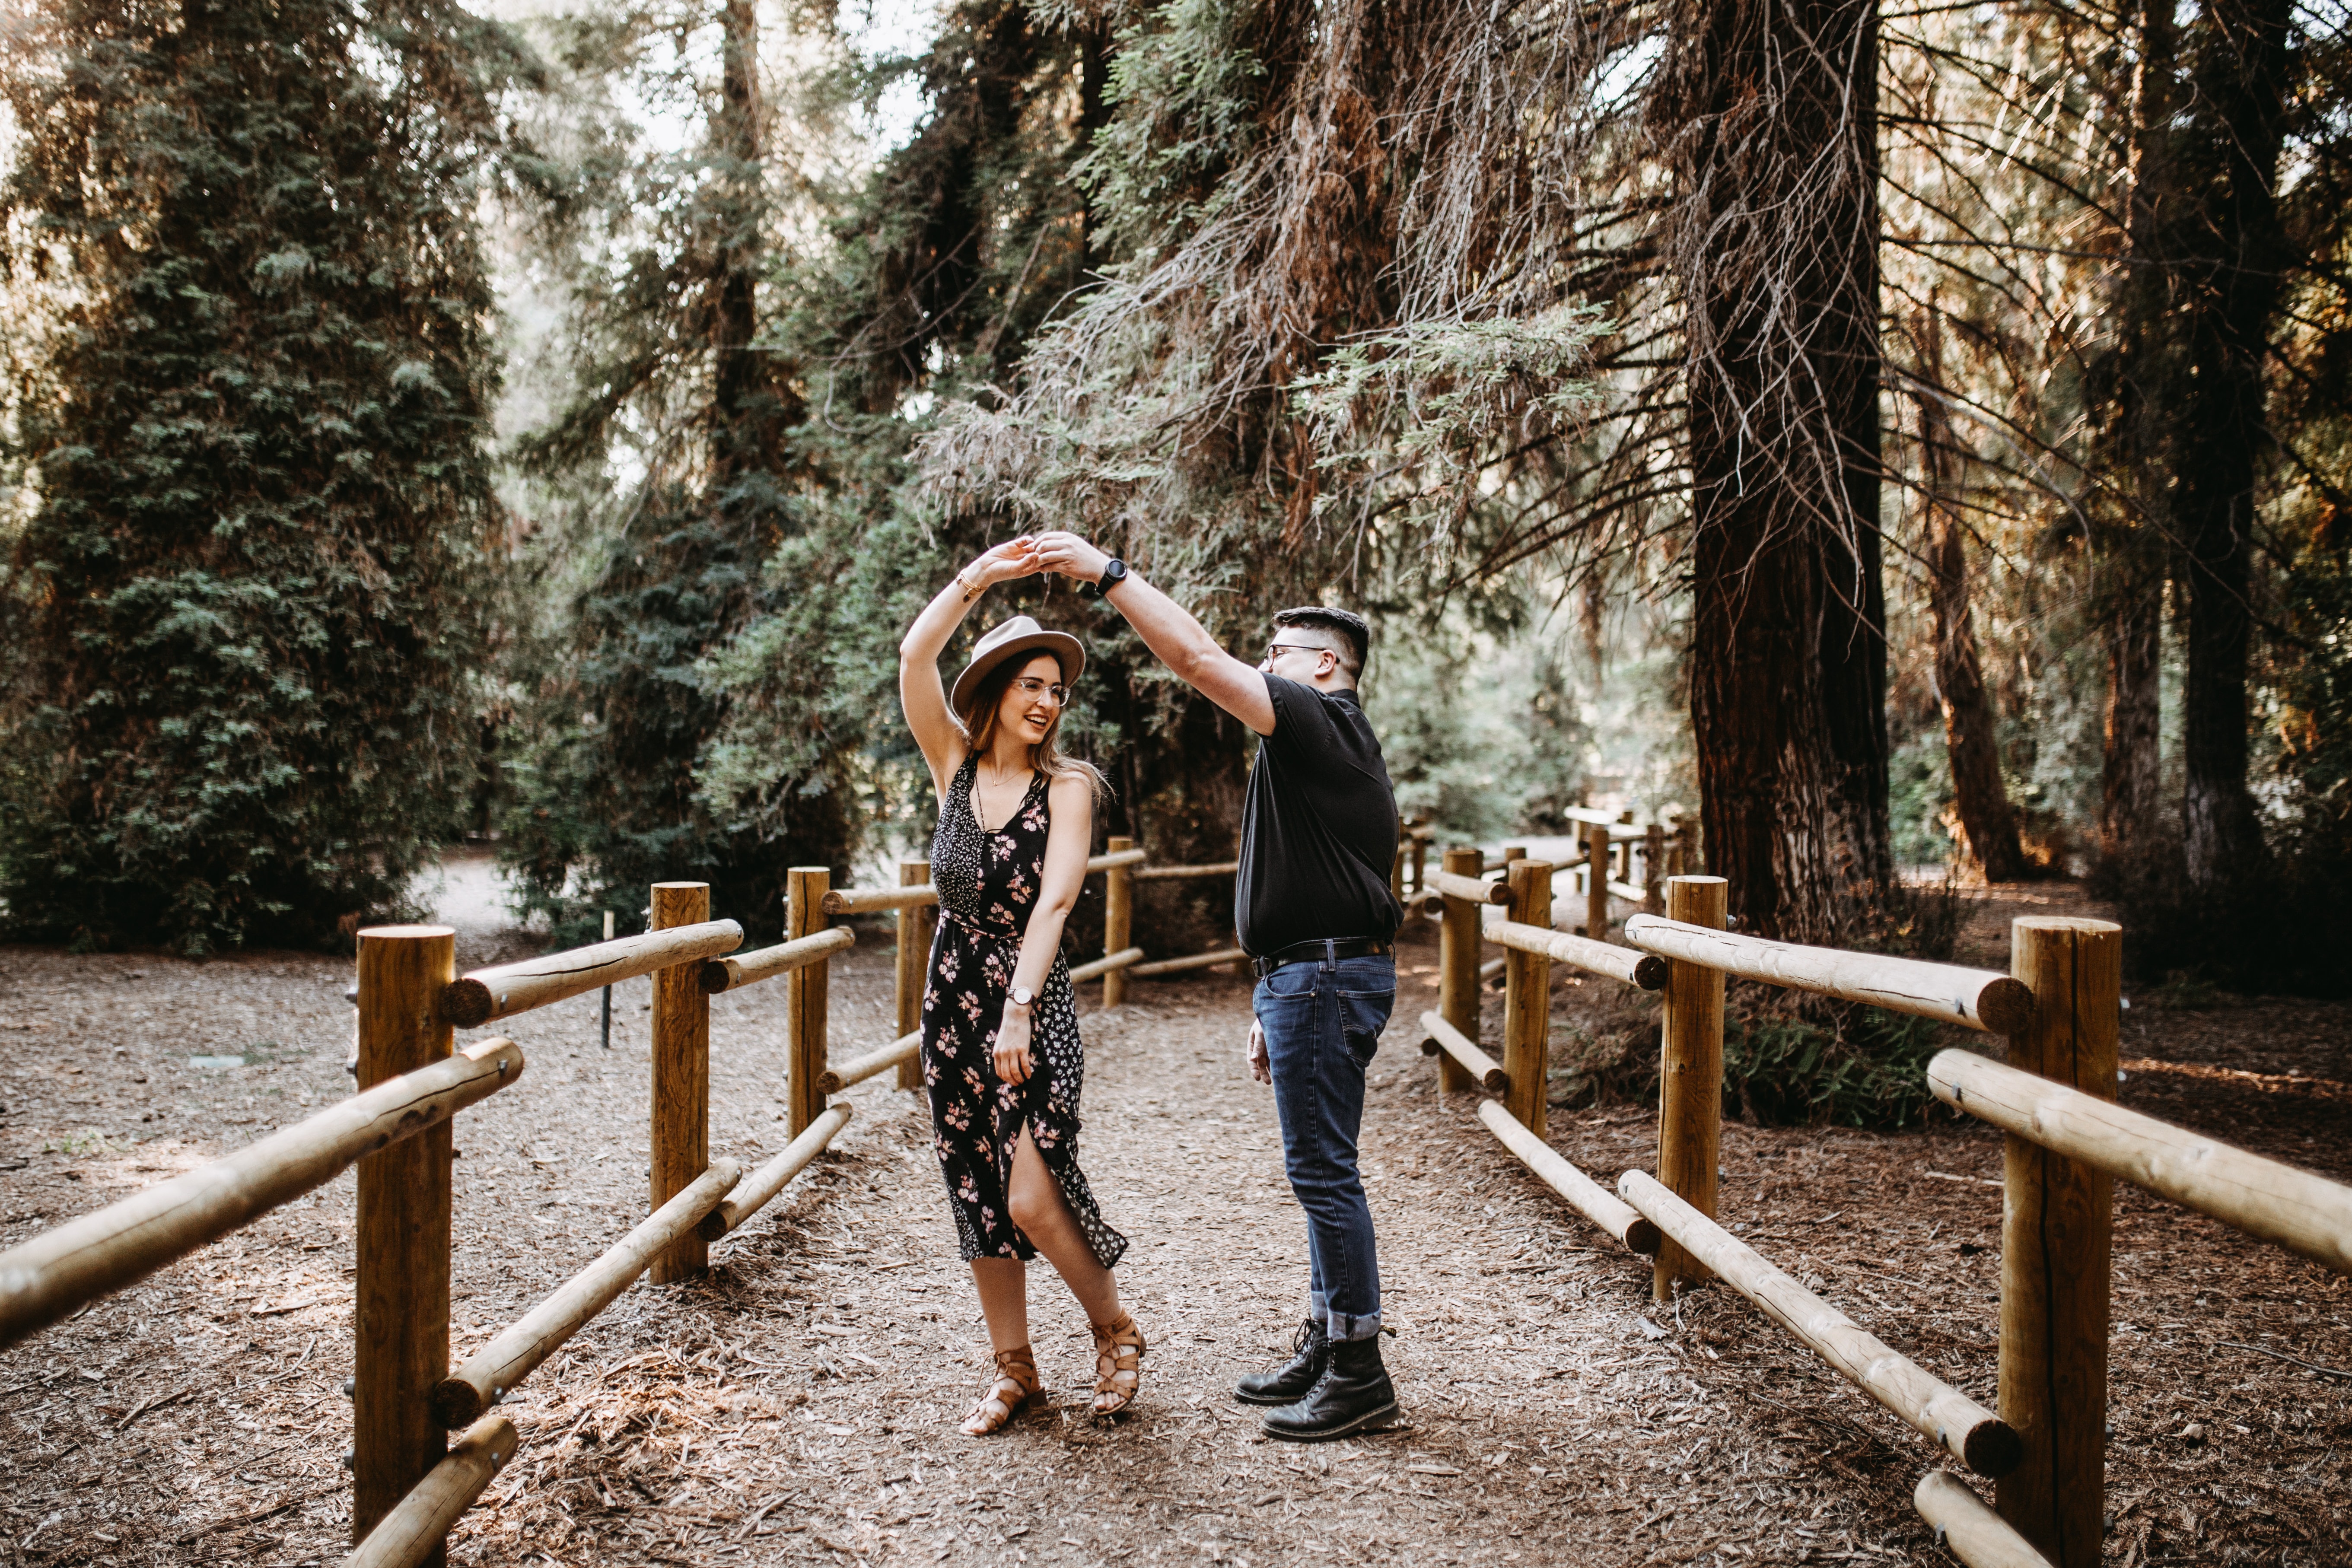 Couple dancing in a forest